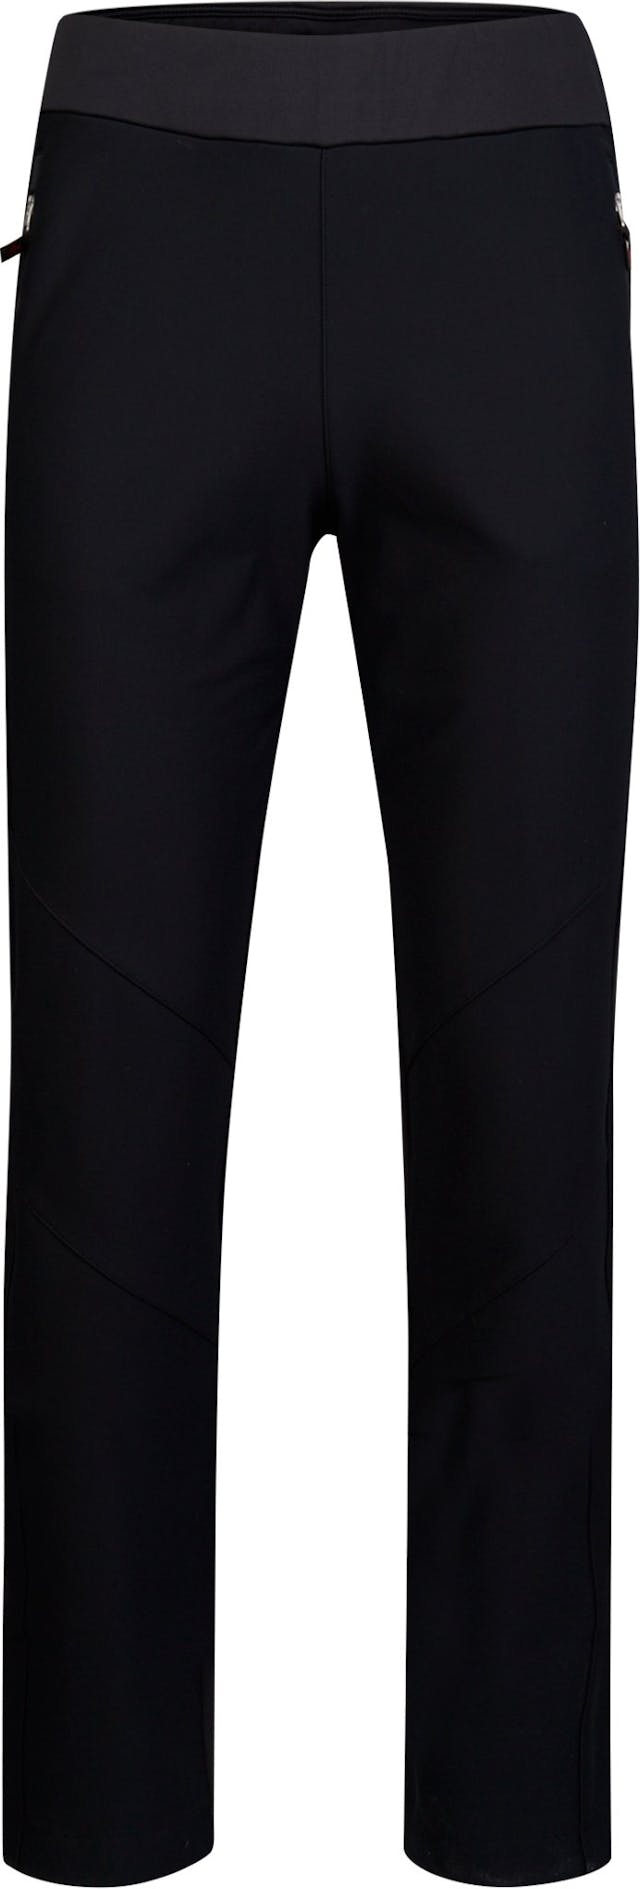 Product image for Collide Pants - Men's